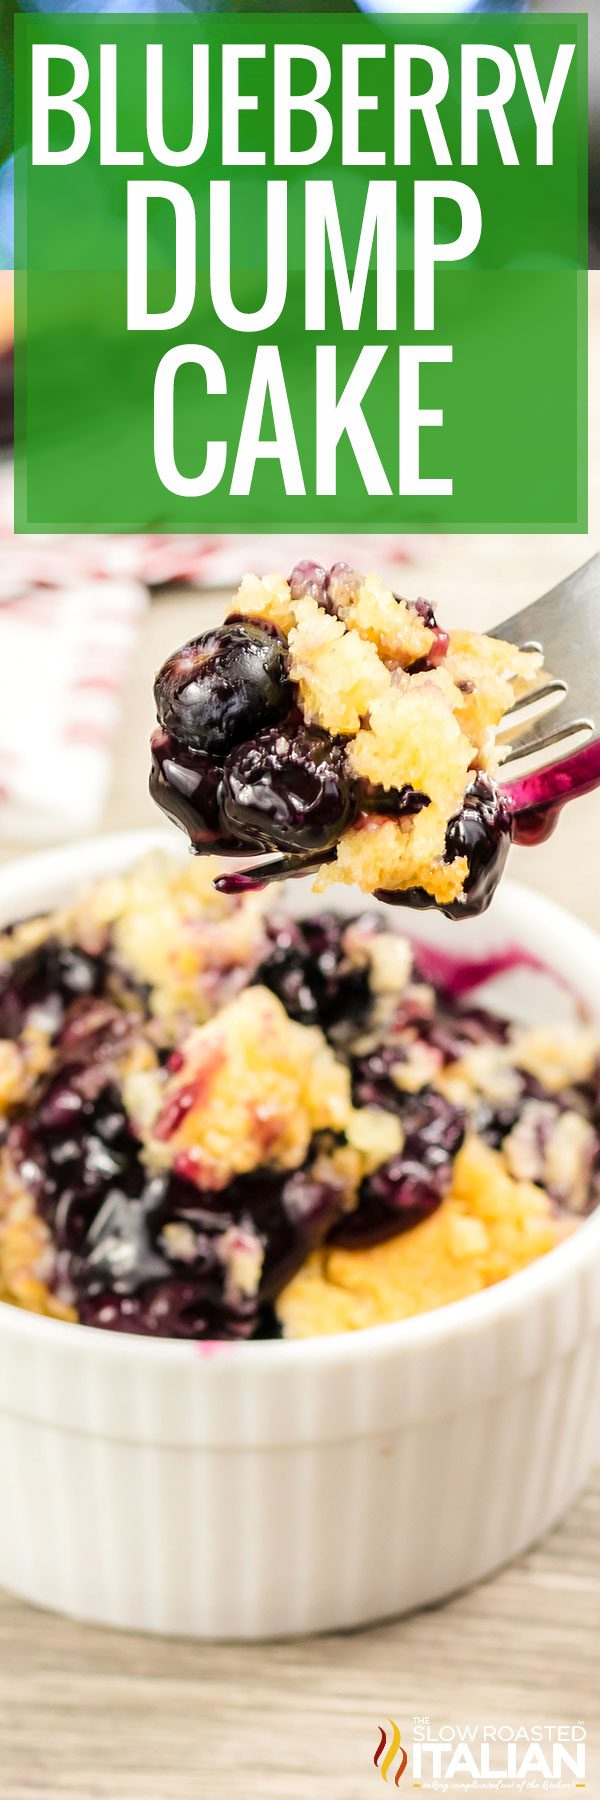 titled image (and shown):  blueberry dump cake